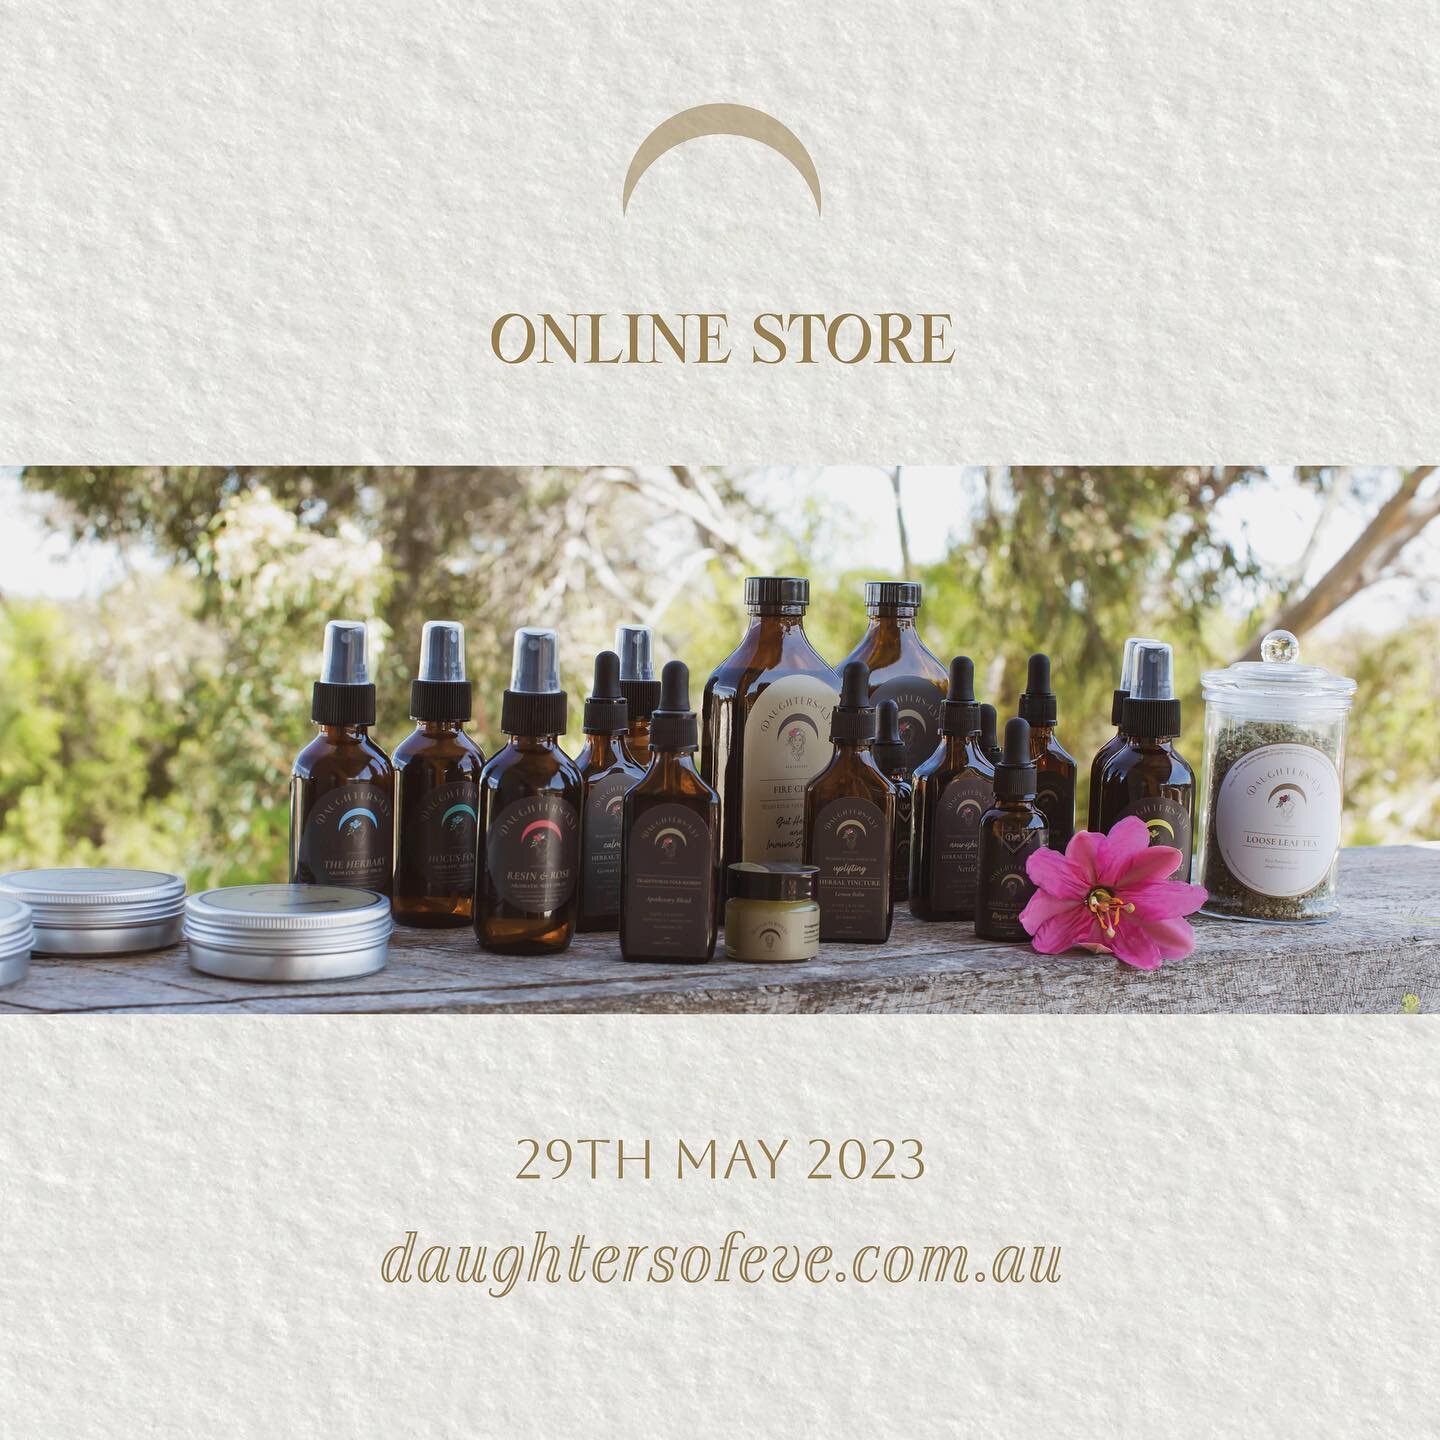 Shop online! Online store live 29th May 2023 Watch this space - discount code coming soon ! Link in bio